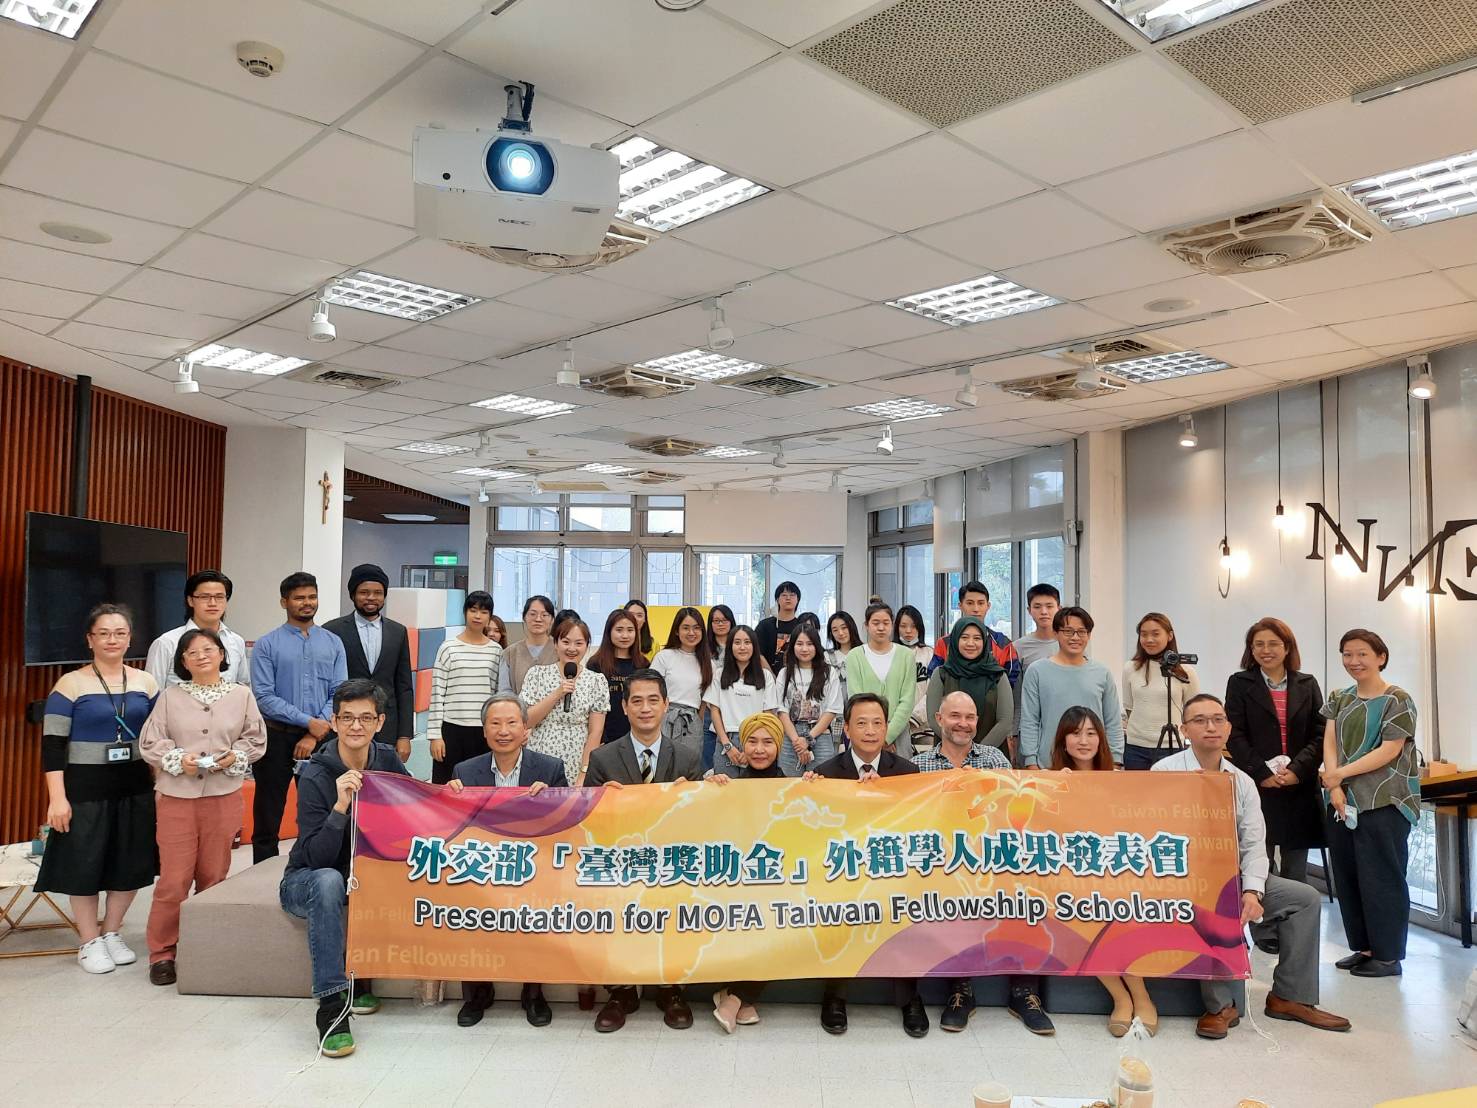 Link: 2021 Presentations of MOFA Taiwan Fellowship Scholars: Cross-Cultural Issue in Diplomatic Perspective